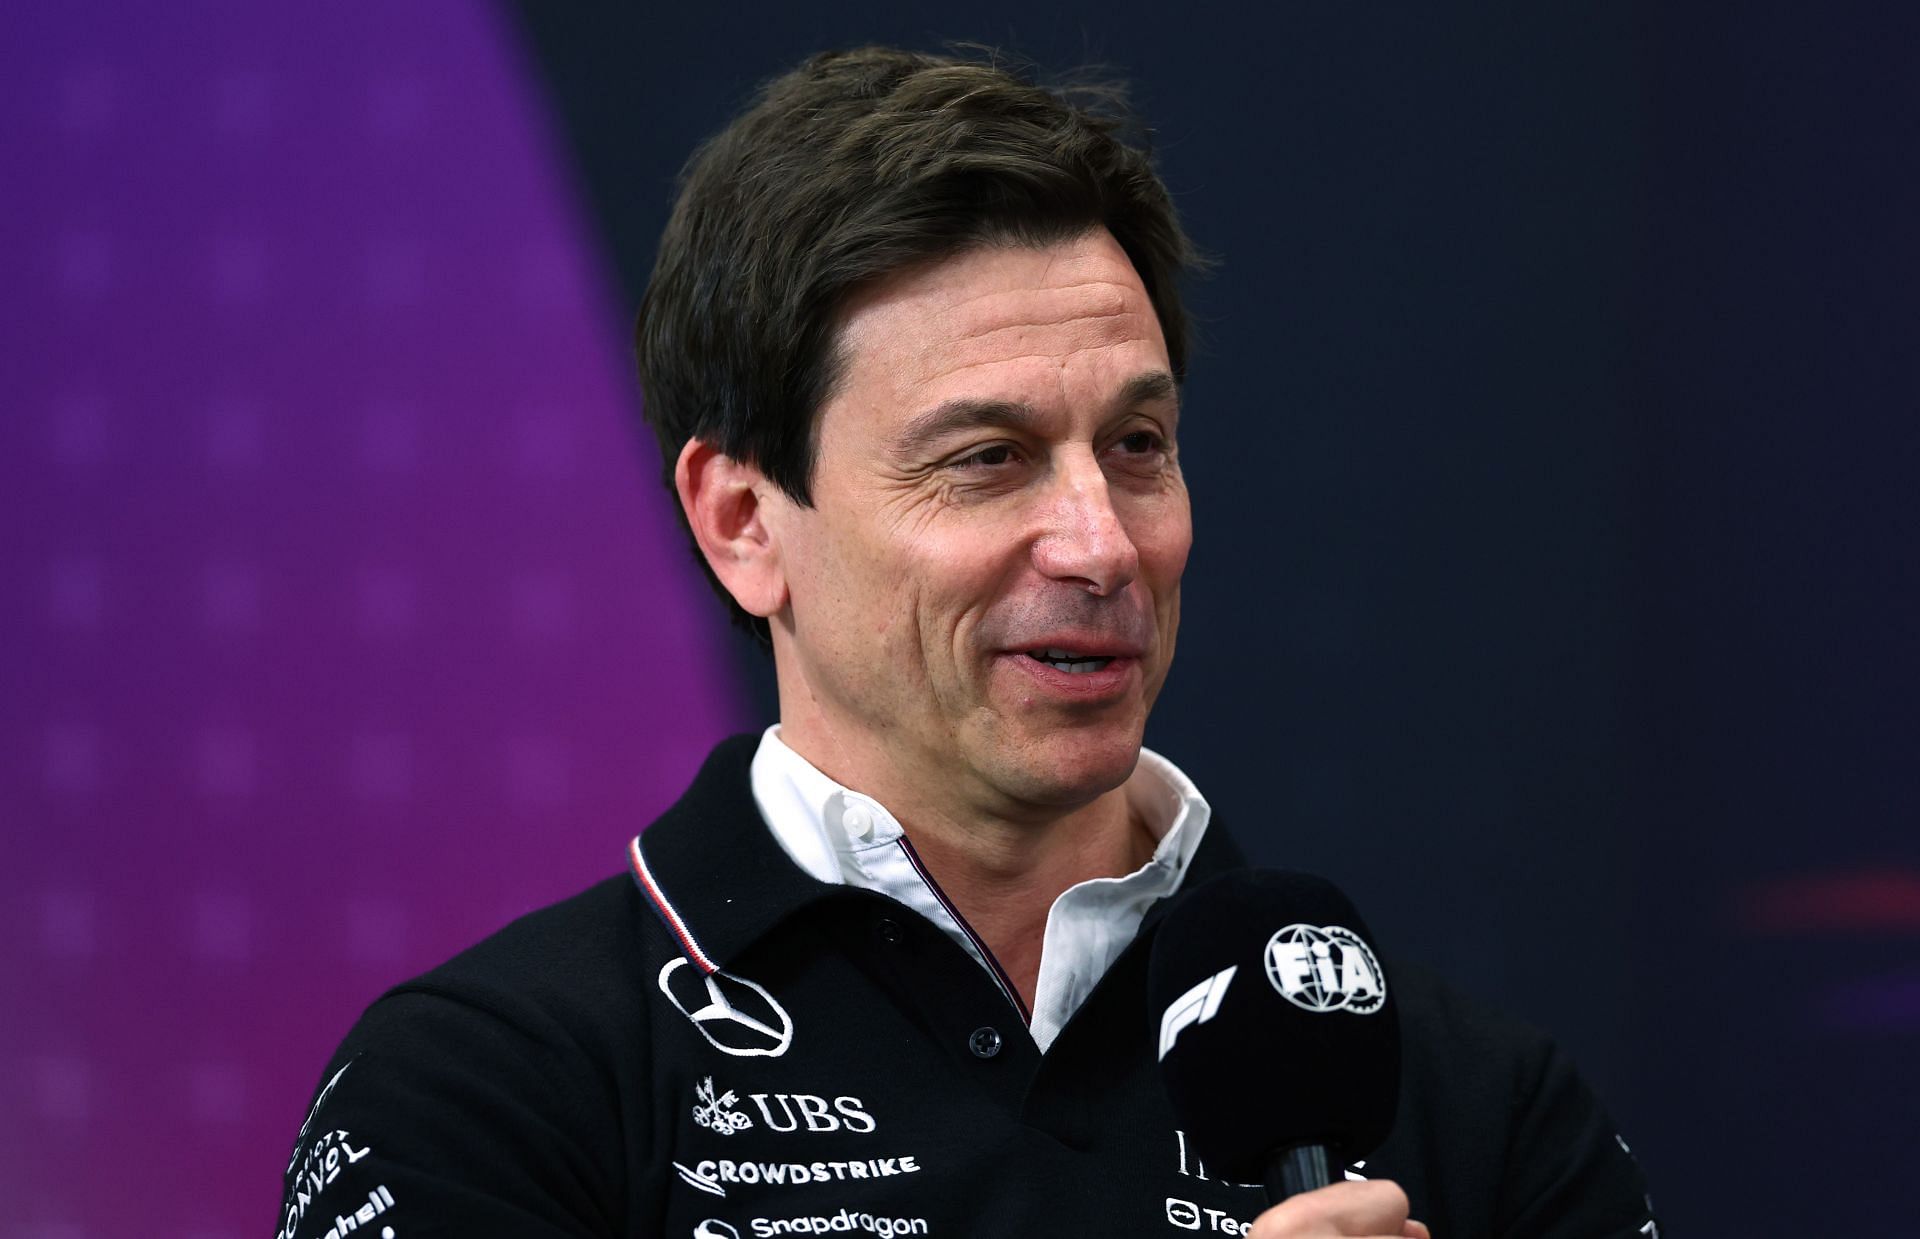 Toto Wolff at the F1 Grand Prix of Japan - Practice